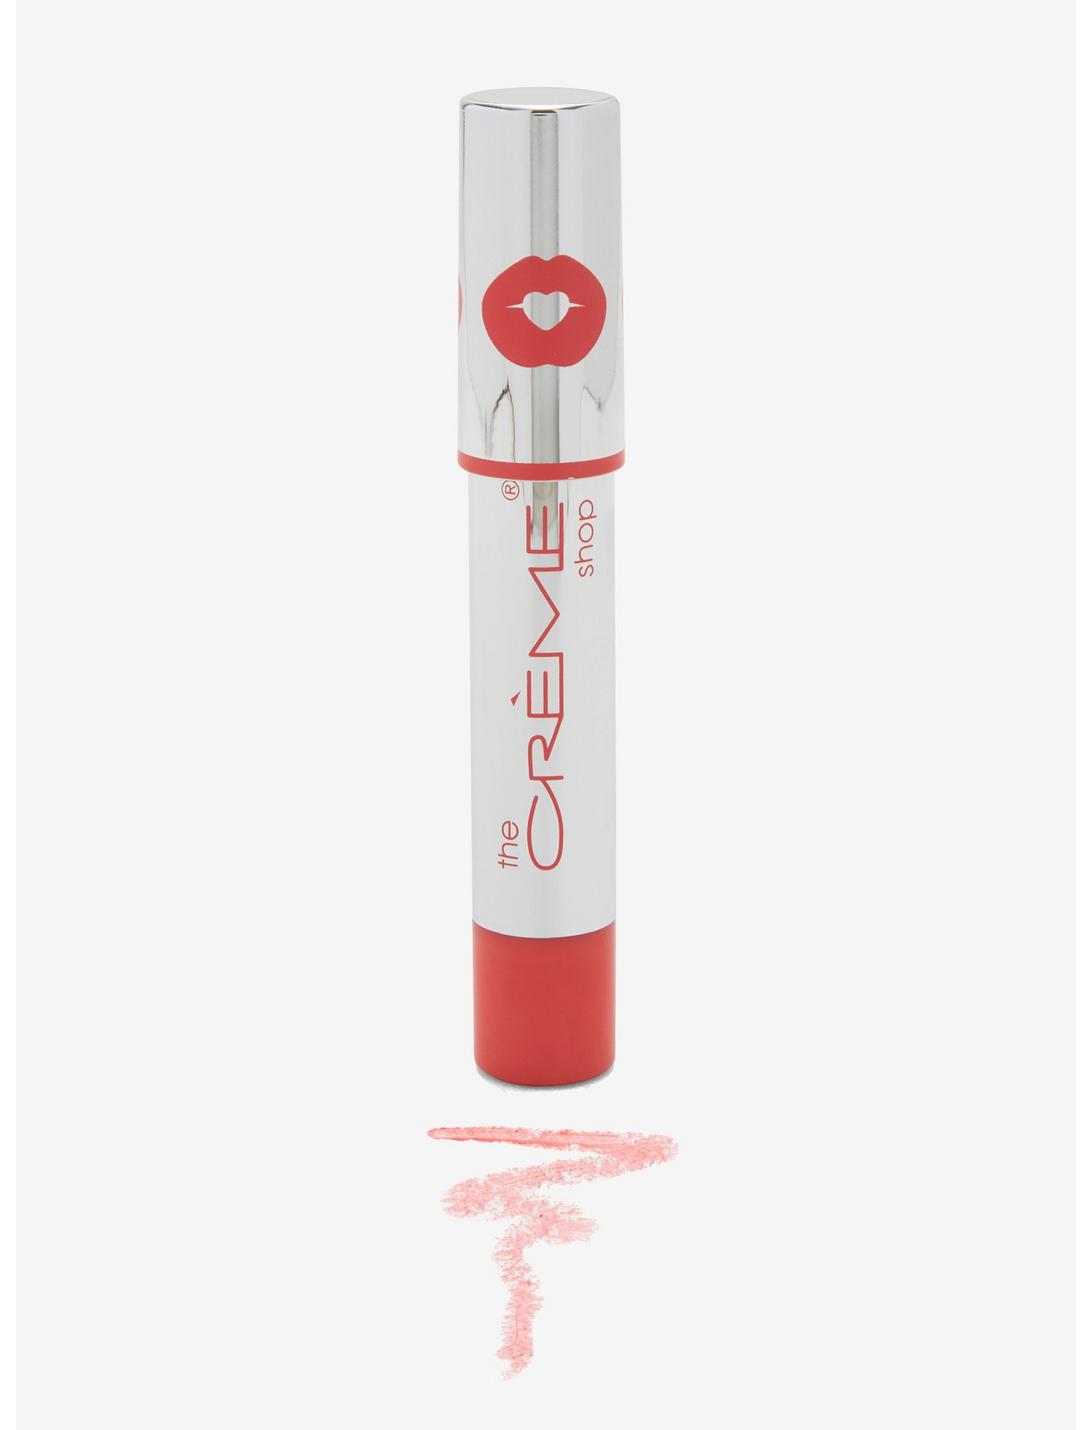 The Creme Shop Cry Baby Tinted Lip Balm, , hi-res